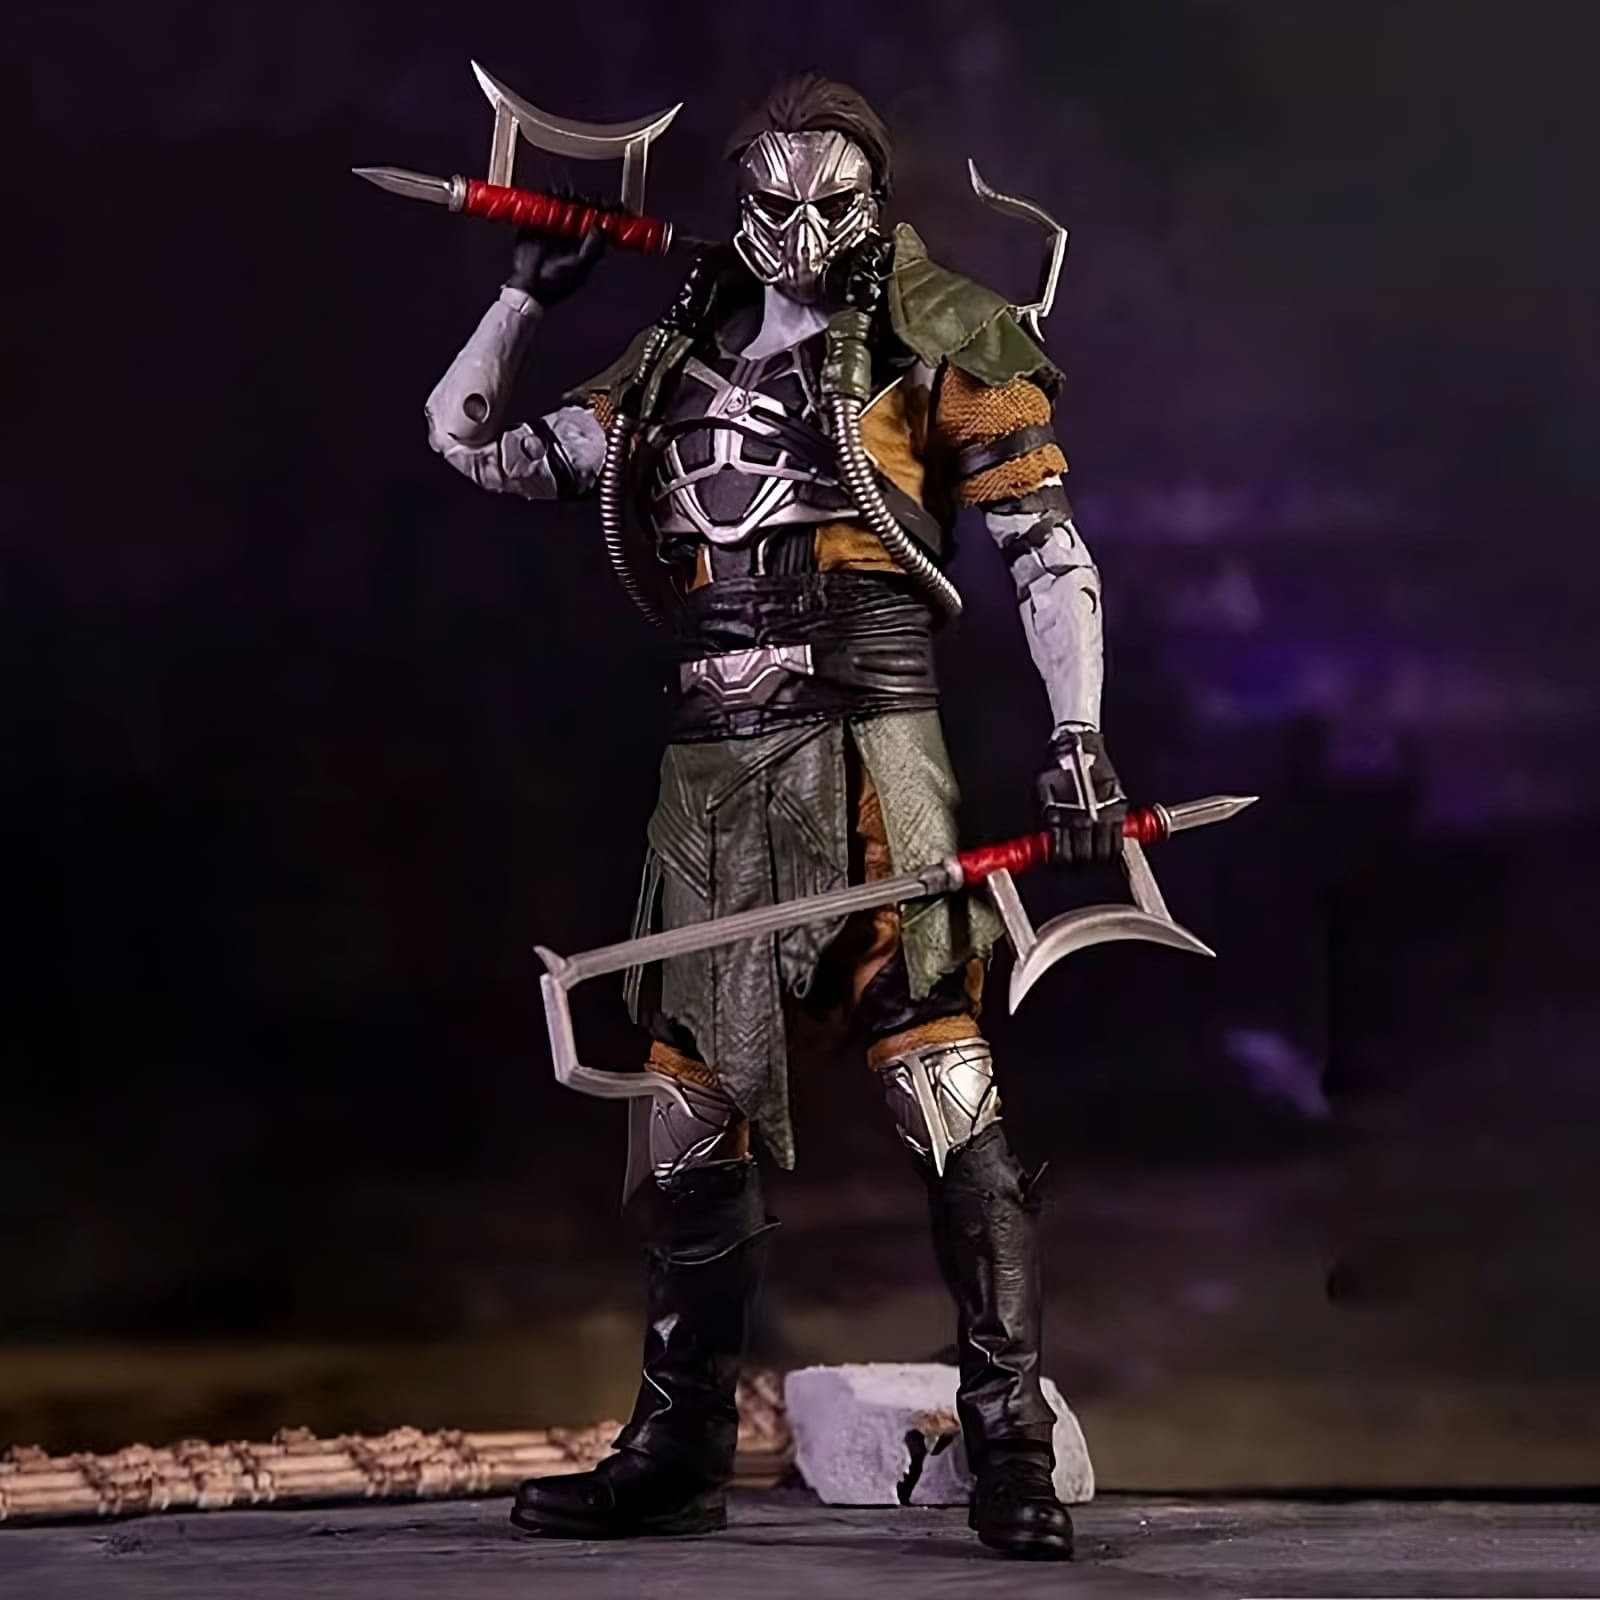 ActionFigure, Kabal, MortalKombat, McFarlaneToys, Collectibles, ToyCollection, GamingMerchandise, VideoGameCollectibles, NerdCollectibles, CollectorItem, LimitedEdition, HighQuality, DetailOriented, PoseableFigure, GamerLife, FightingGame, MortalKombatFan, ToyPhotography, GeekCulture, MustHaveCollectible